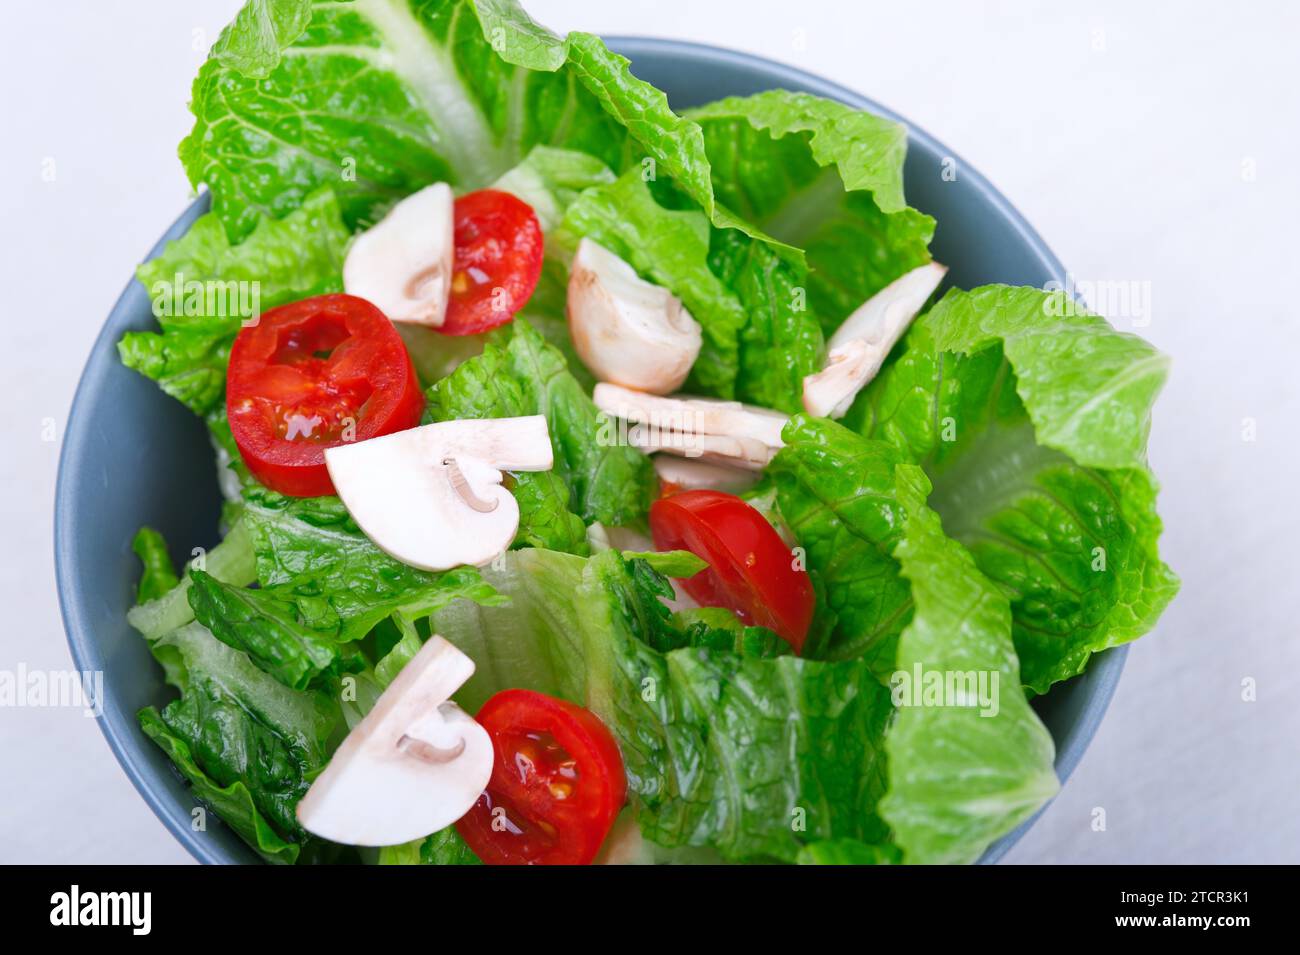 Fresh mixed salad from the garden Stock Photo